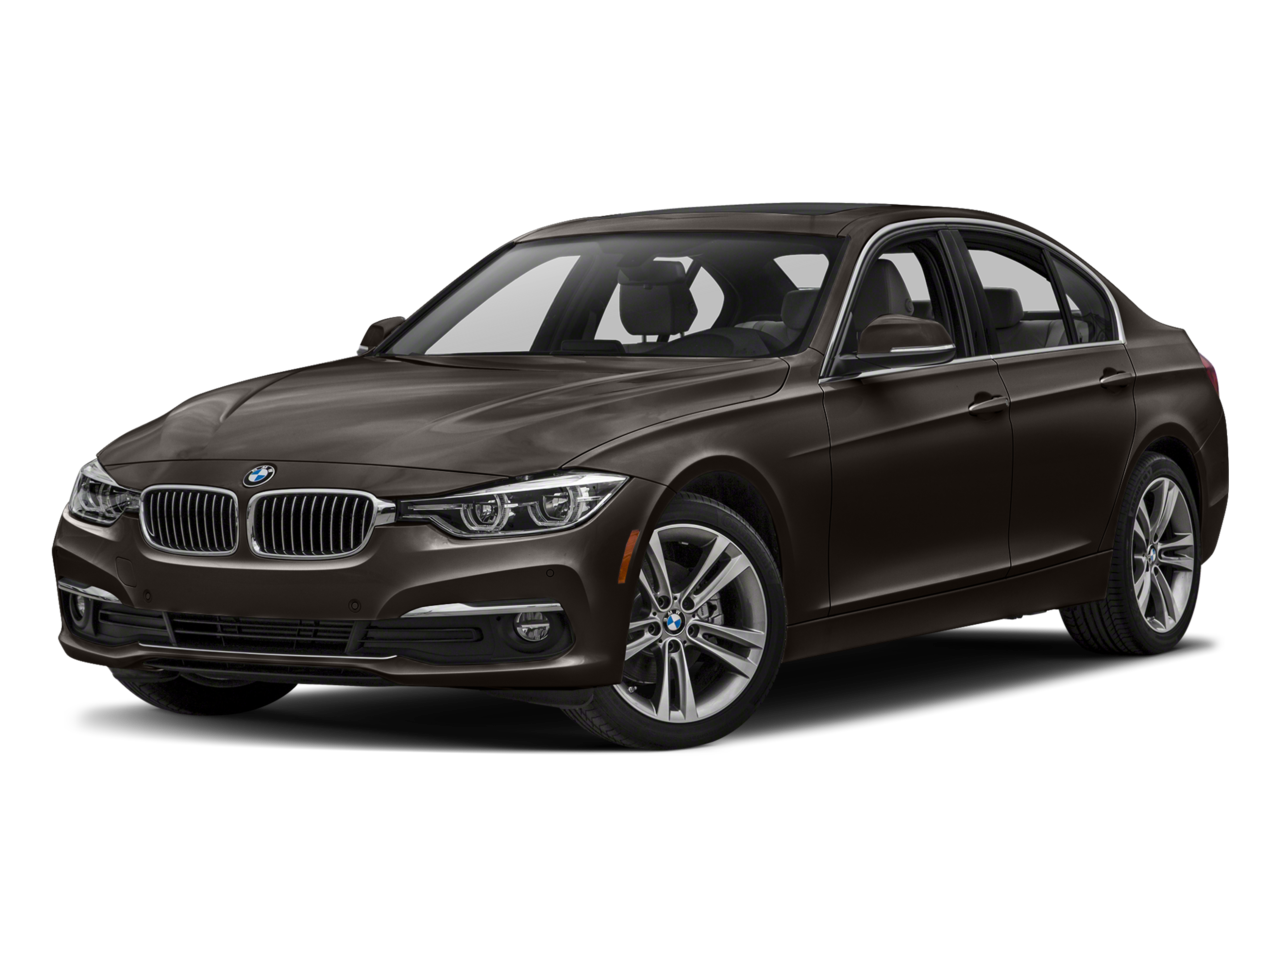 2018 BMW 328d Repair: Service and Maintenance Cost